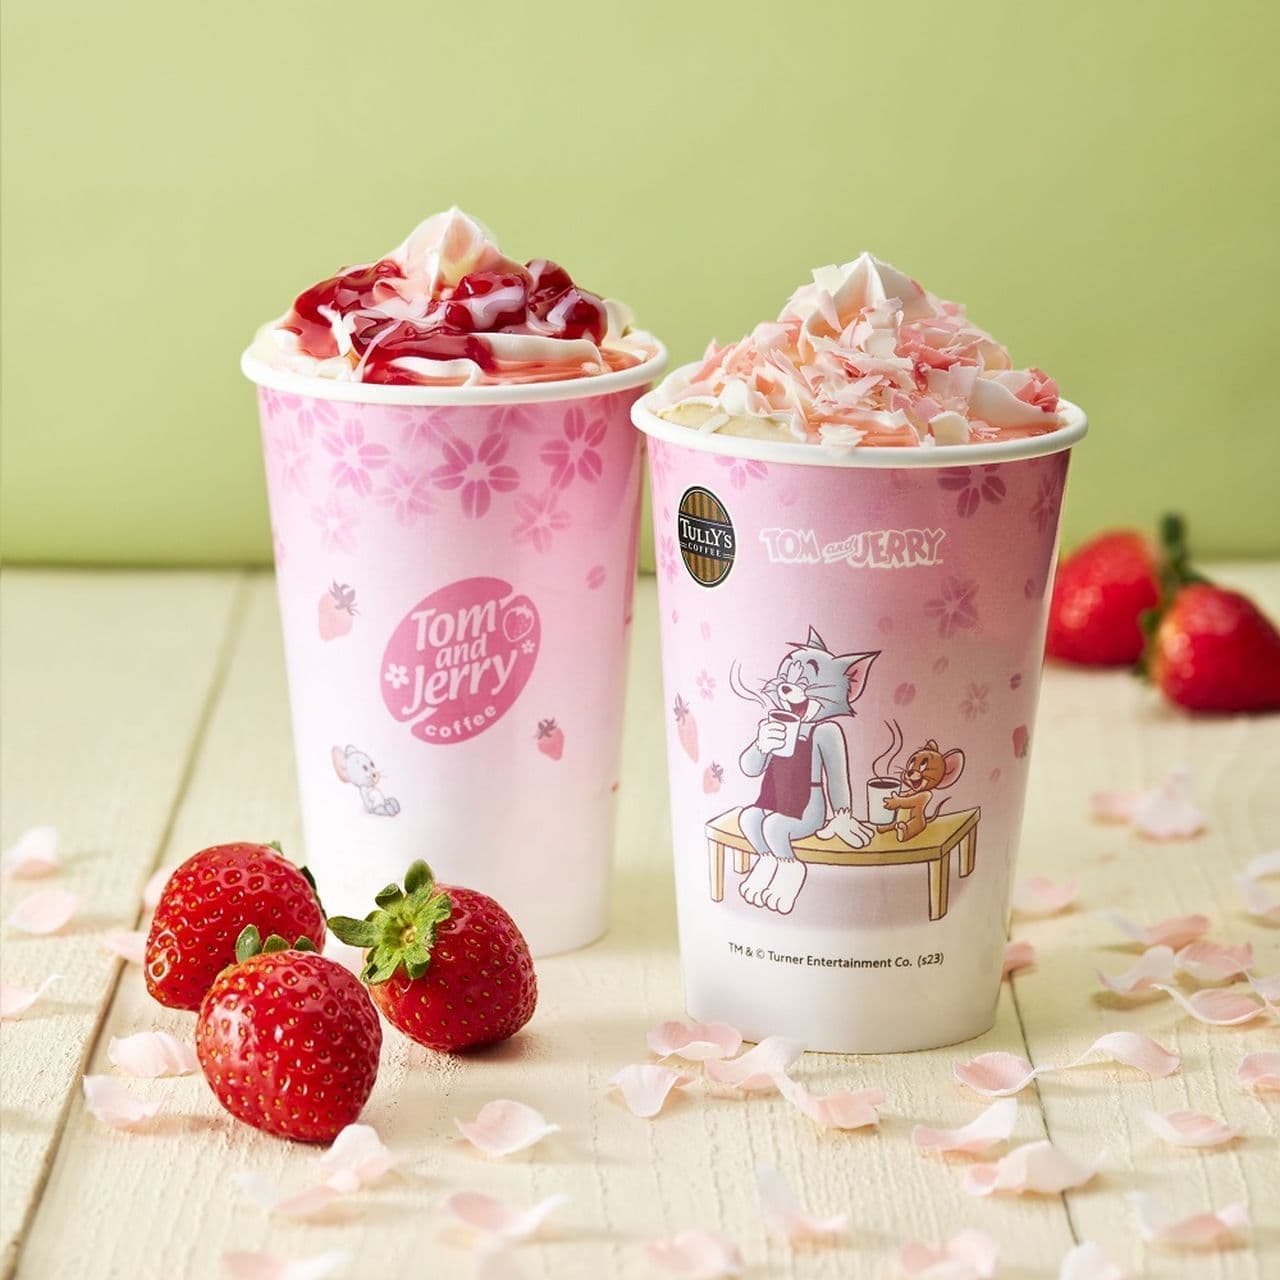 Tully's Coffee "Tom & Jerry: Cherry Blossom Dancing Strawberry White Chocolat Latte" and "Tom & Jerry & TEA: Cherry Blossom Scented Strawberry Royal Milk Tea".